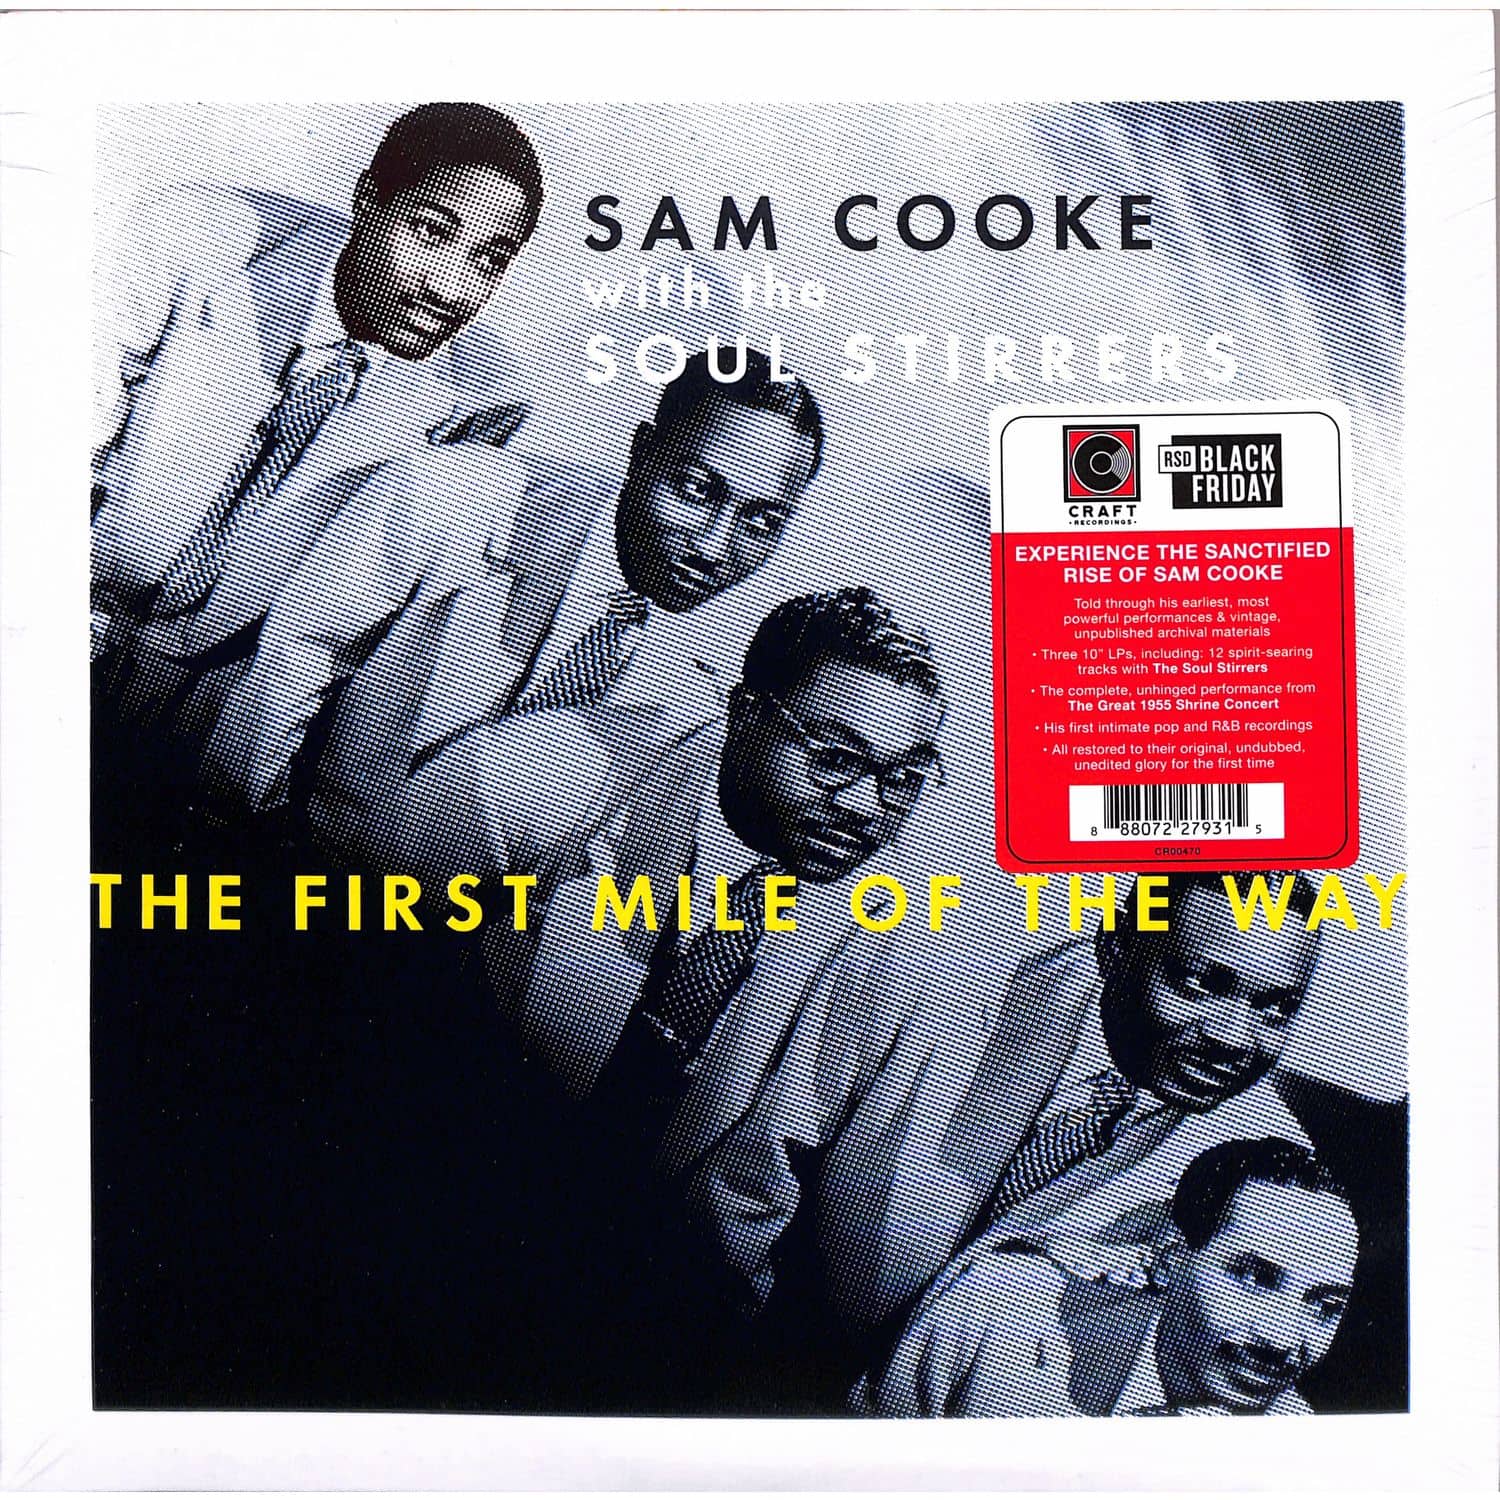 Sam Cooke - THE FIRST MILE OF THE WAY 